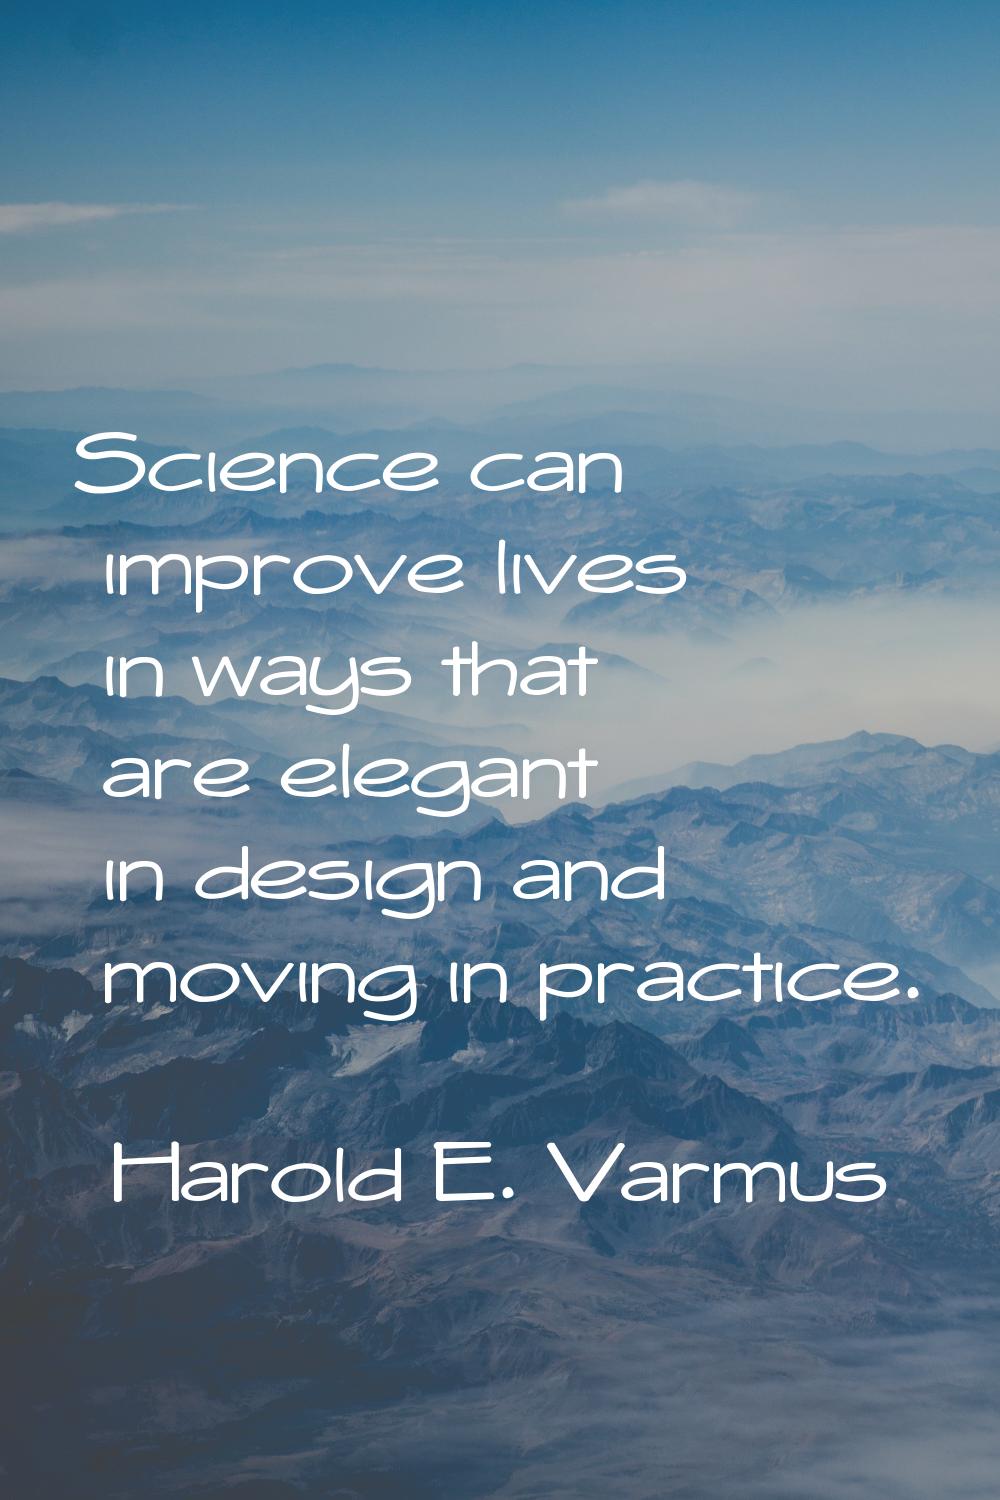 Science can improve lives in ways that are elegant in design and moving in practice.